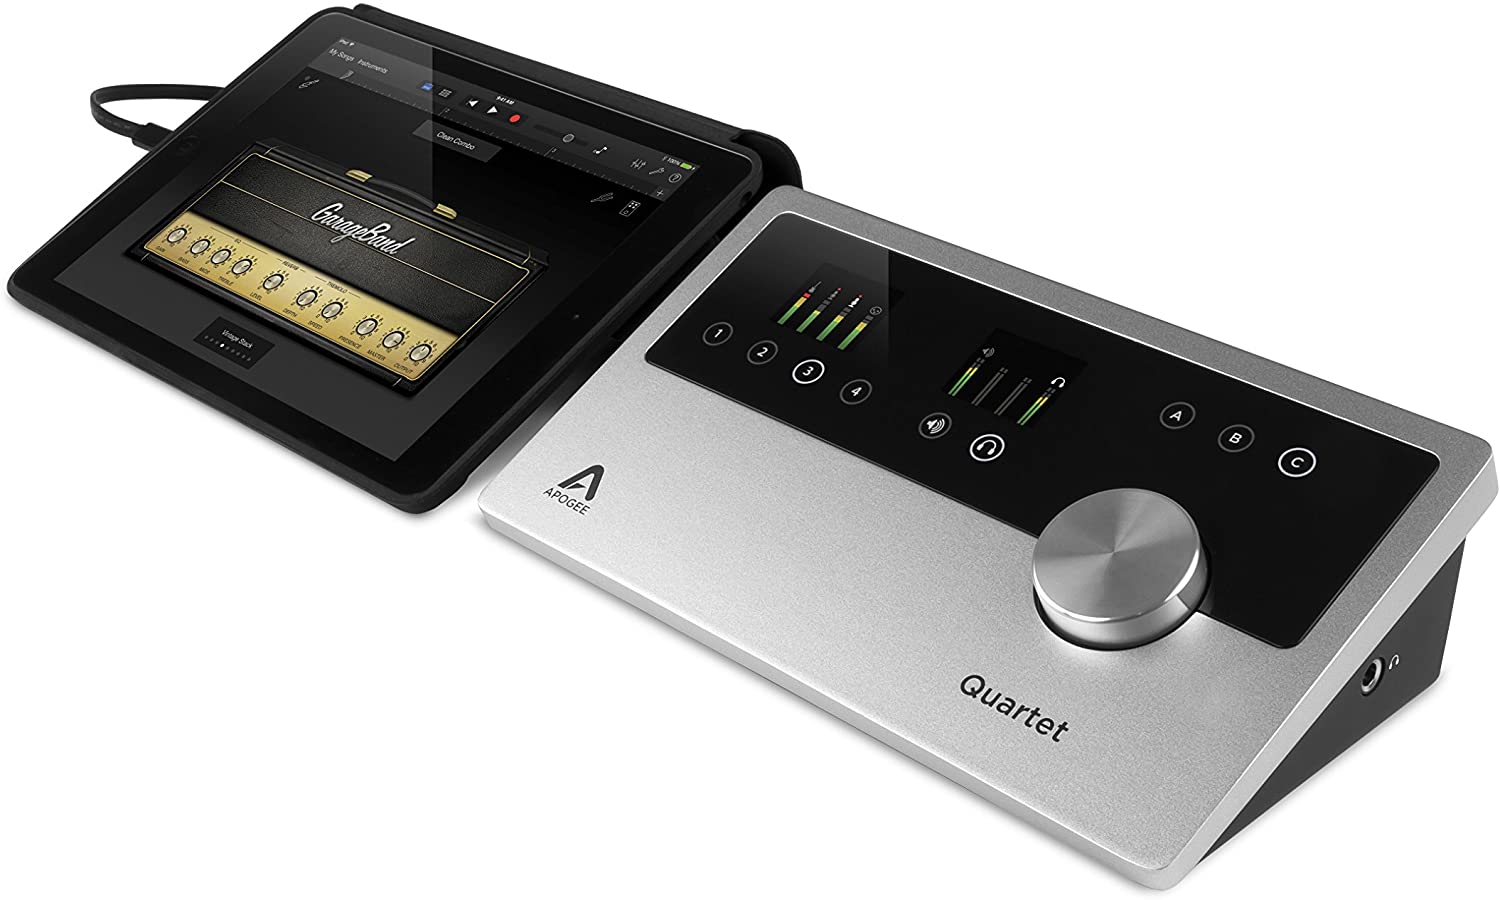 apogee electronics one for mac 10 usb 2.0 audio interface with built-in microphone